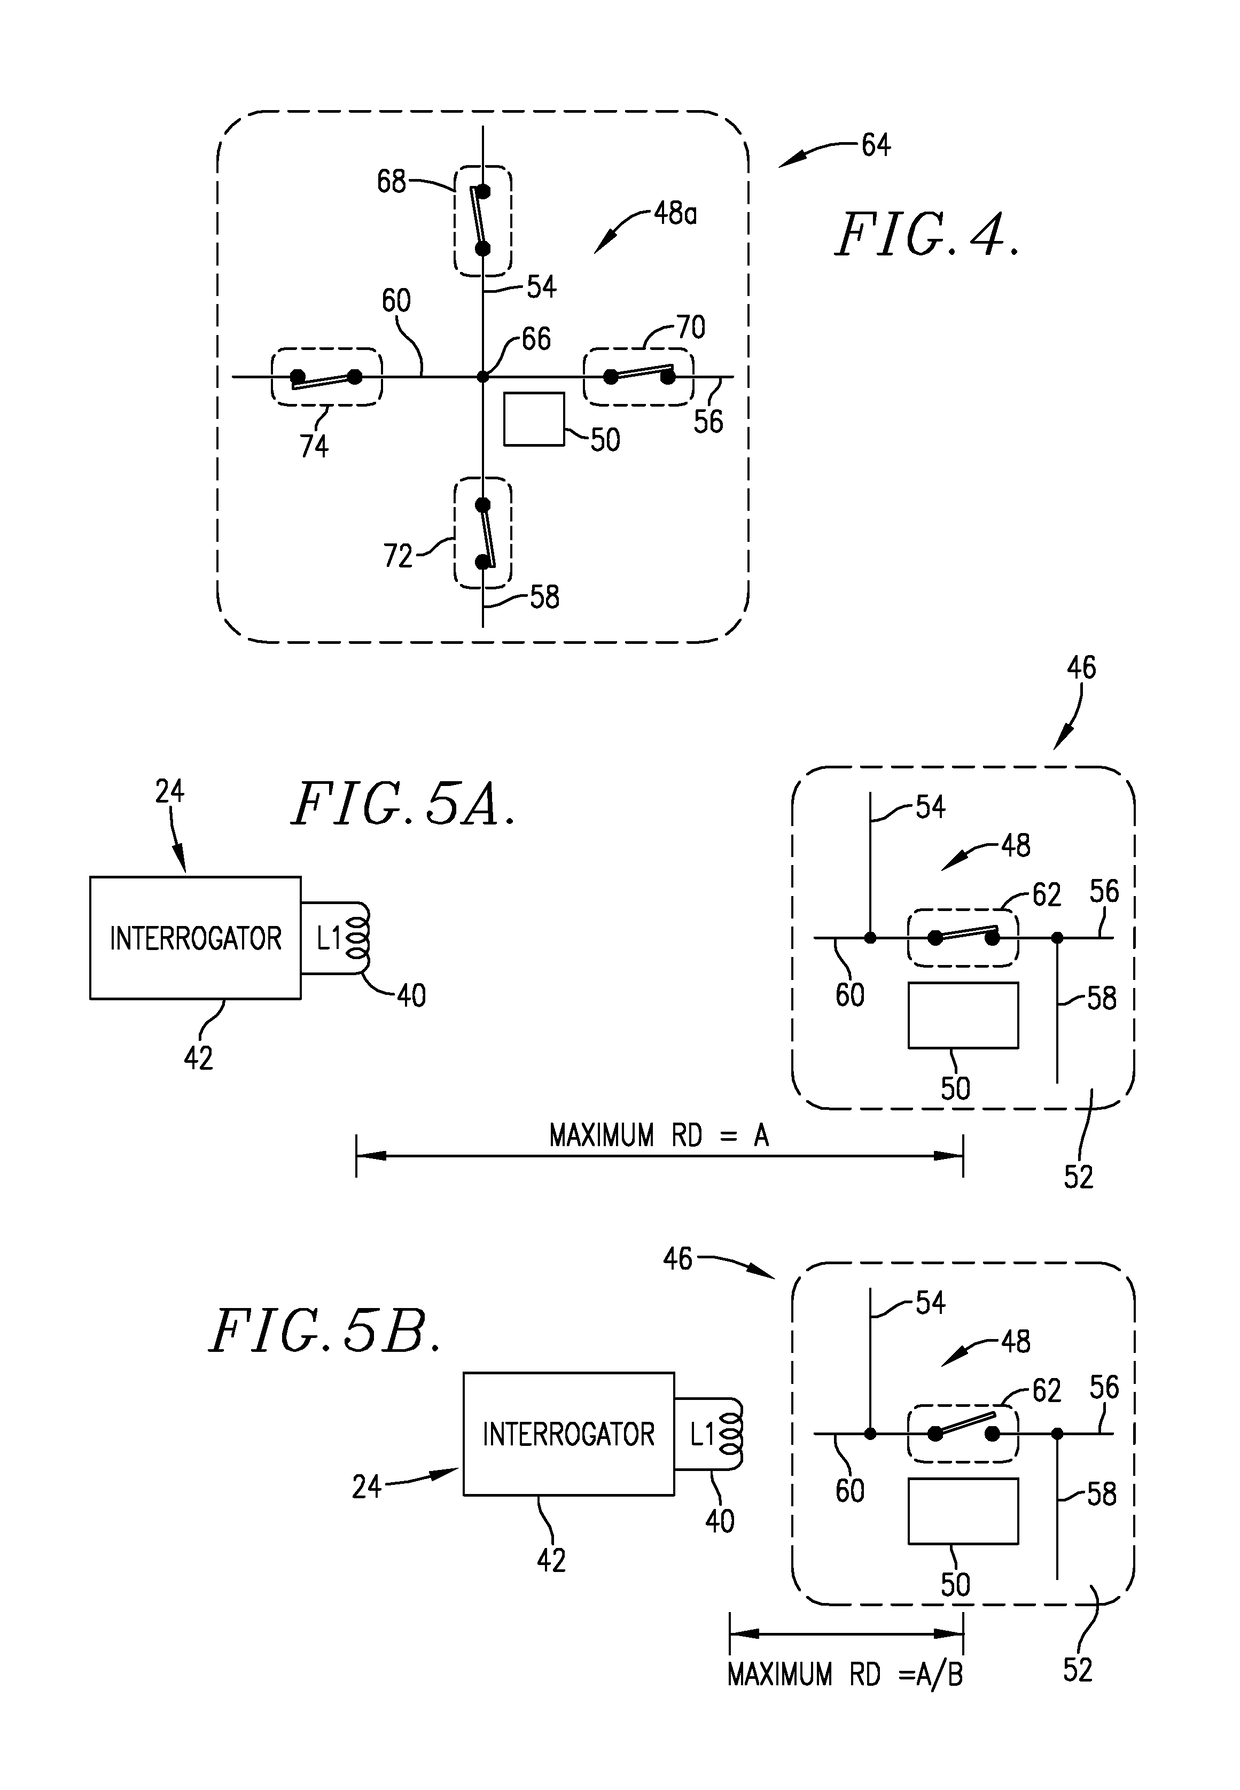 Temperature measurement system employing an electromagnetic transponder and separate impedance-changing parasitic antenna